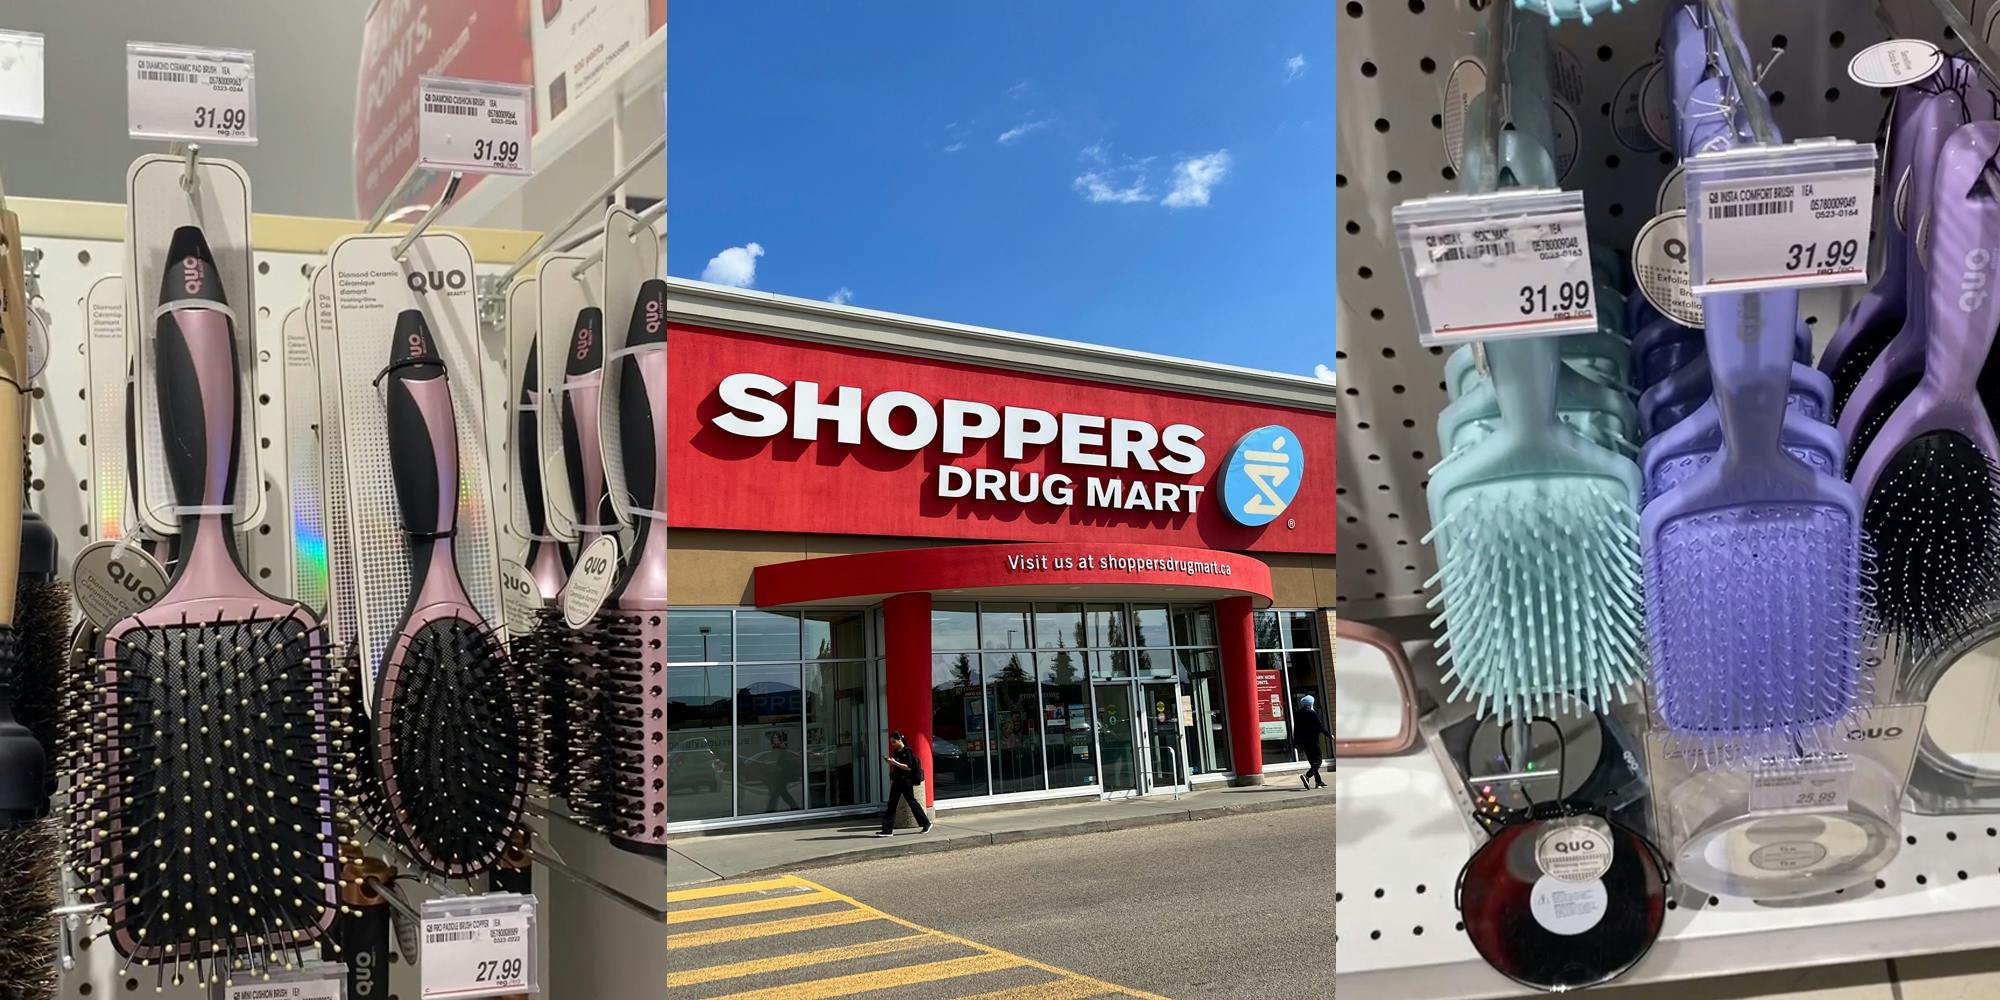 ‘Dollarama quality but Sephora price’: Shoppers Drug Mart customer calls out hairbrush’s $30 price tag